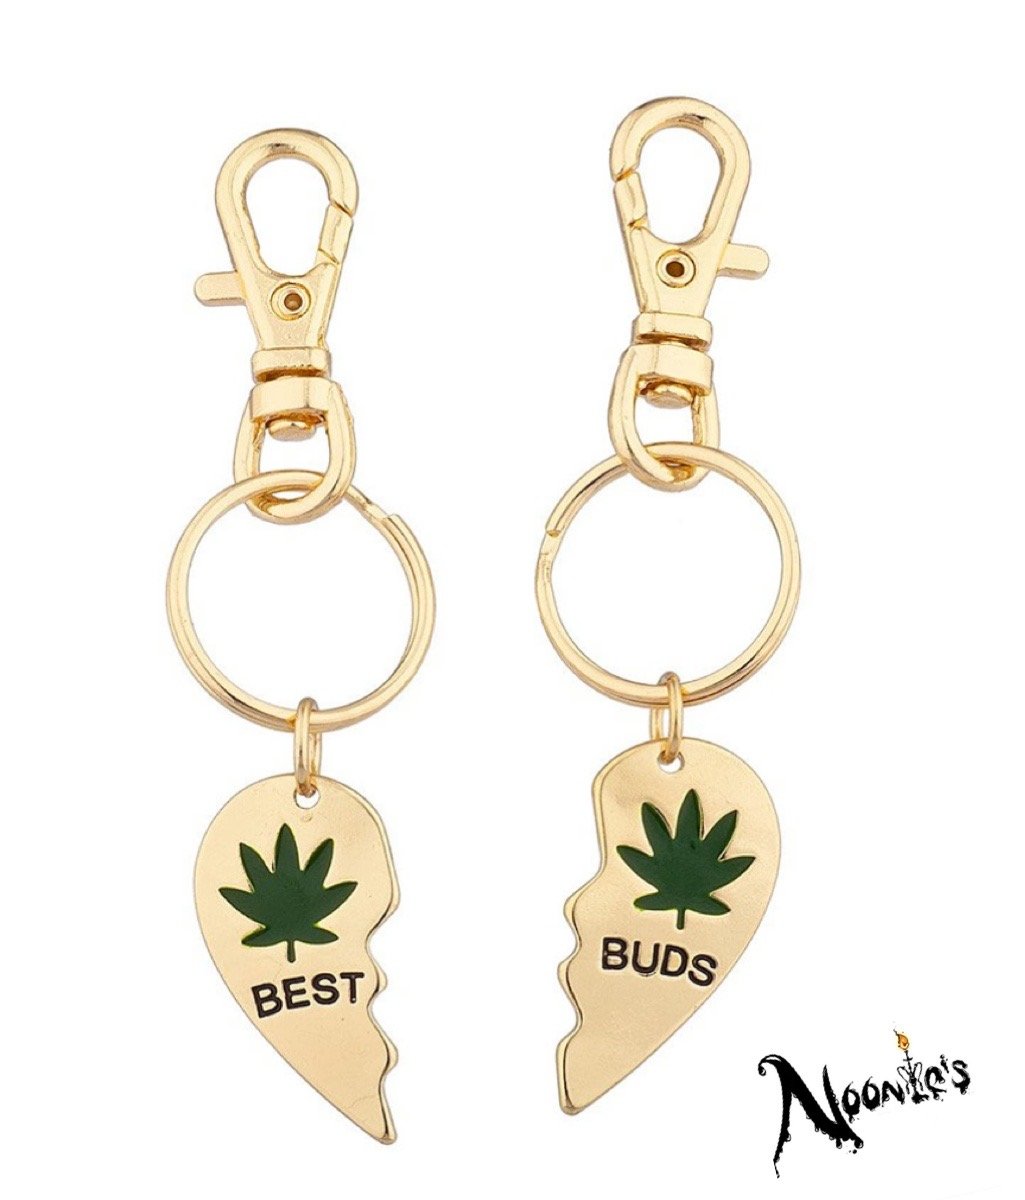 Image of Best buds key chains 